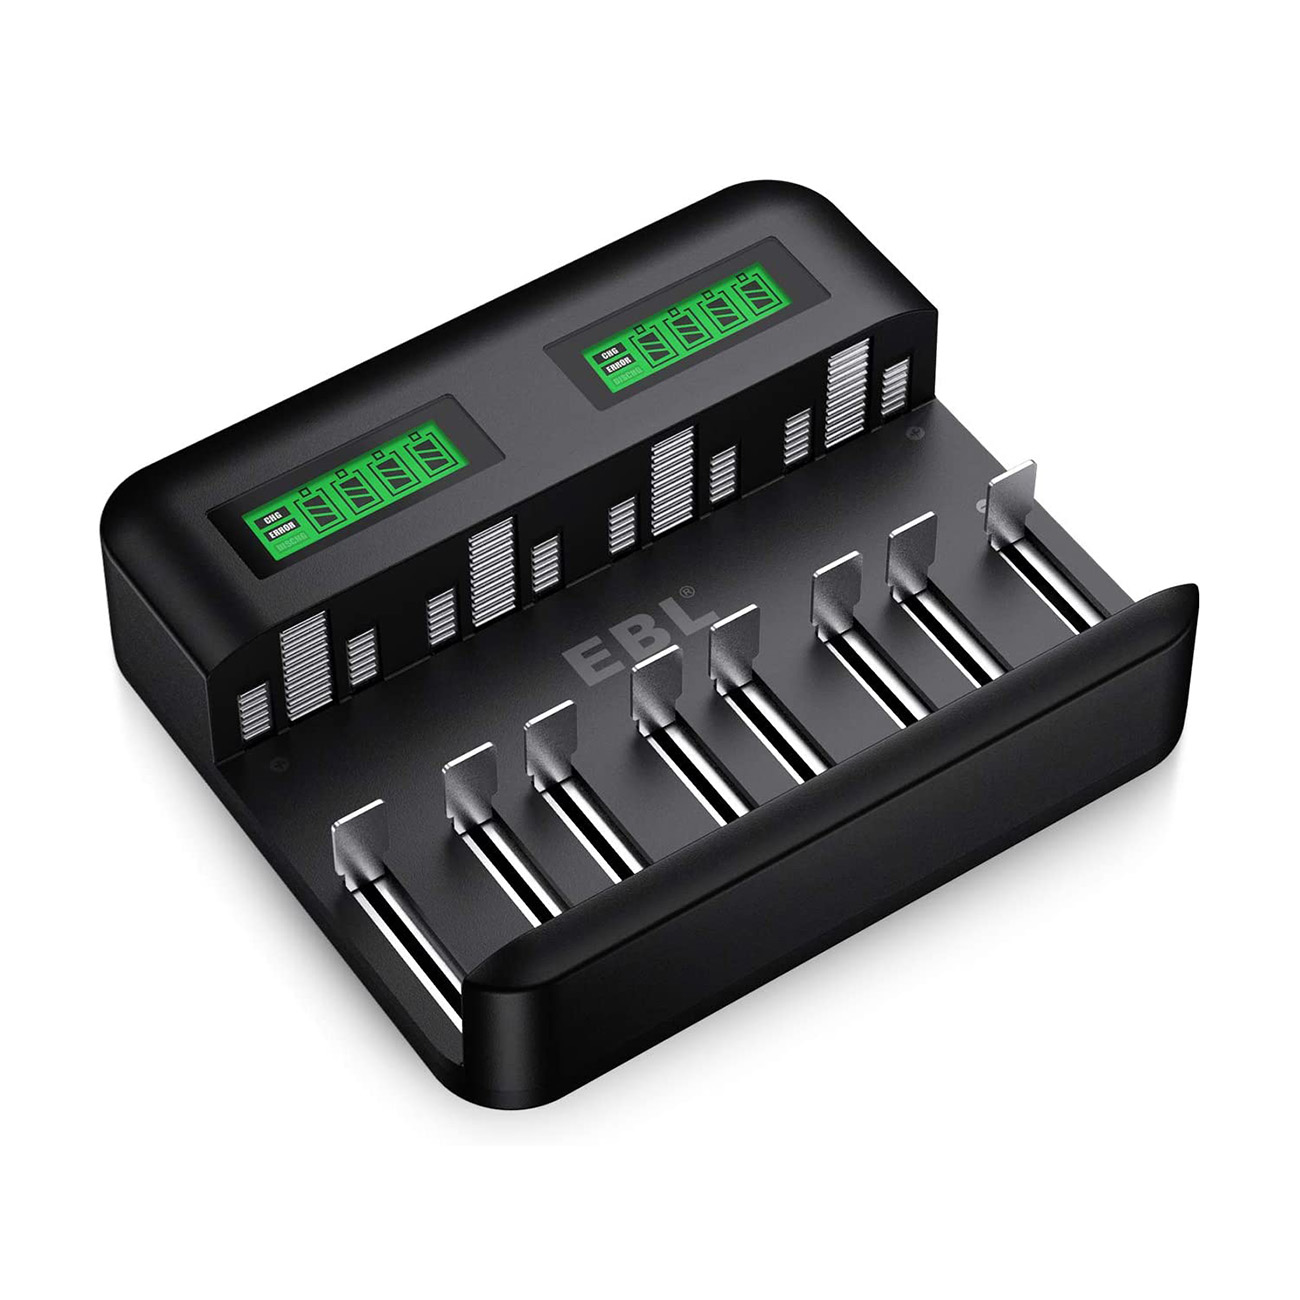 EBL LCD Universal Battery Charger – 8 Bay AA AAA C D Battery